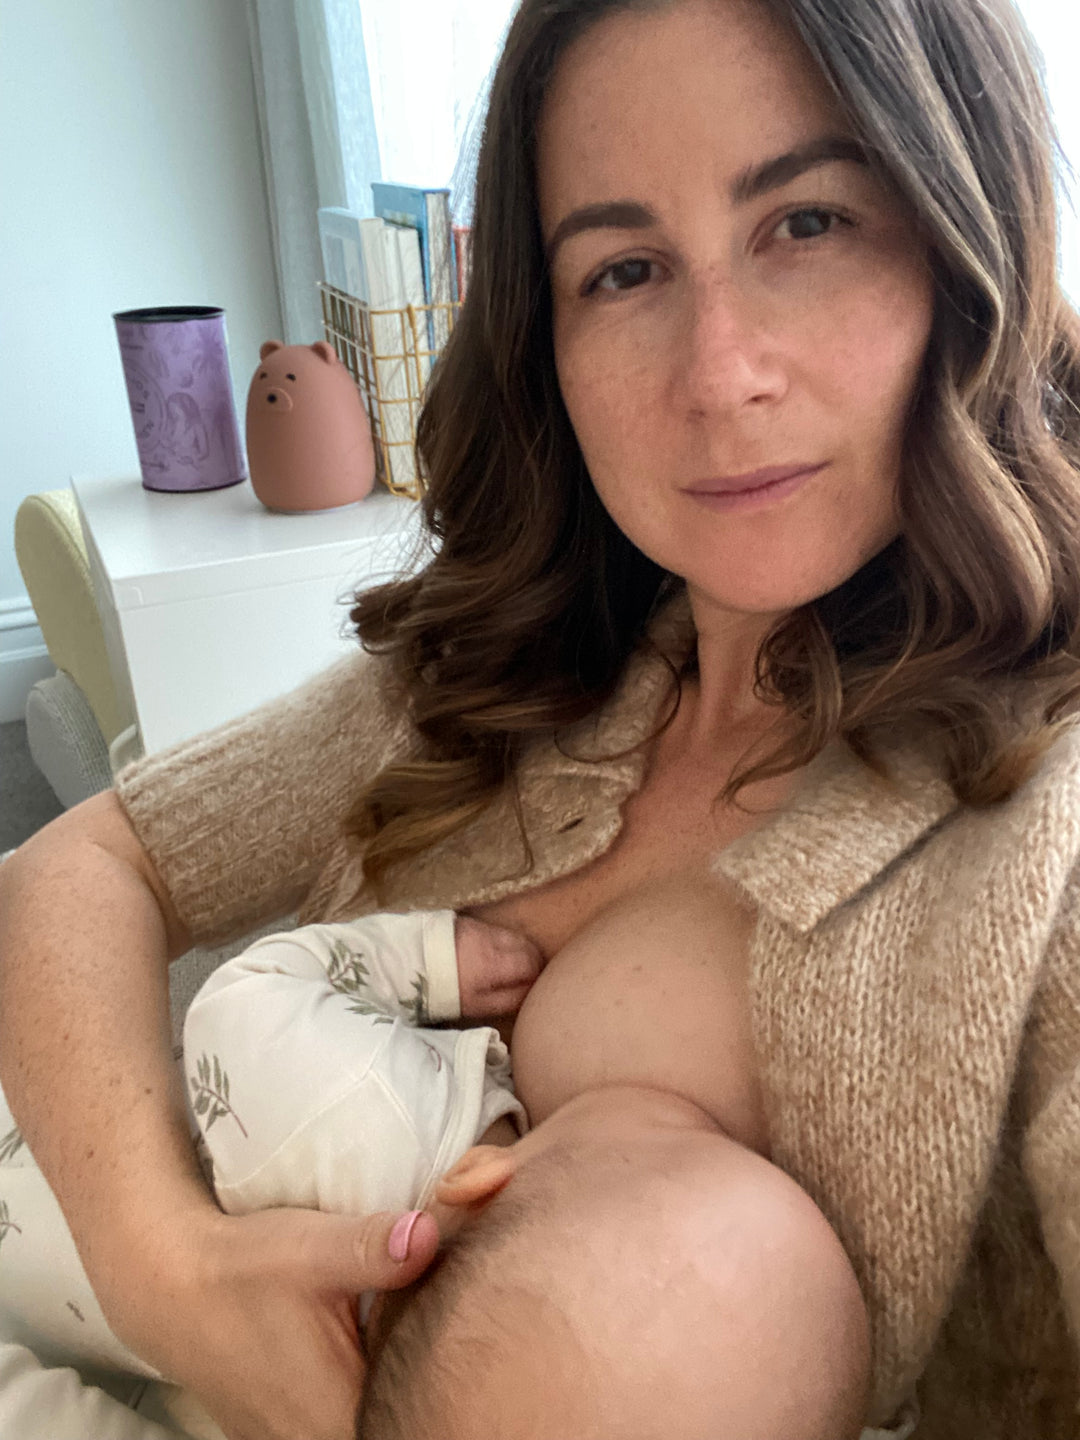 My breastfeeding journey: “Brands should give women what they need to feel good about parenting and breastfeeding.”